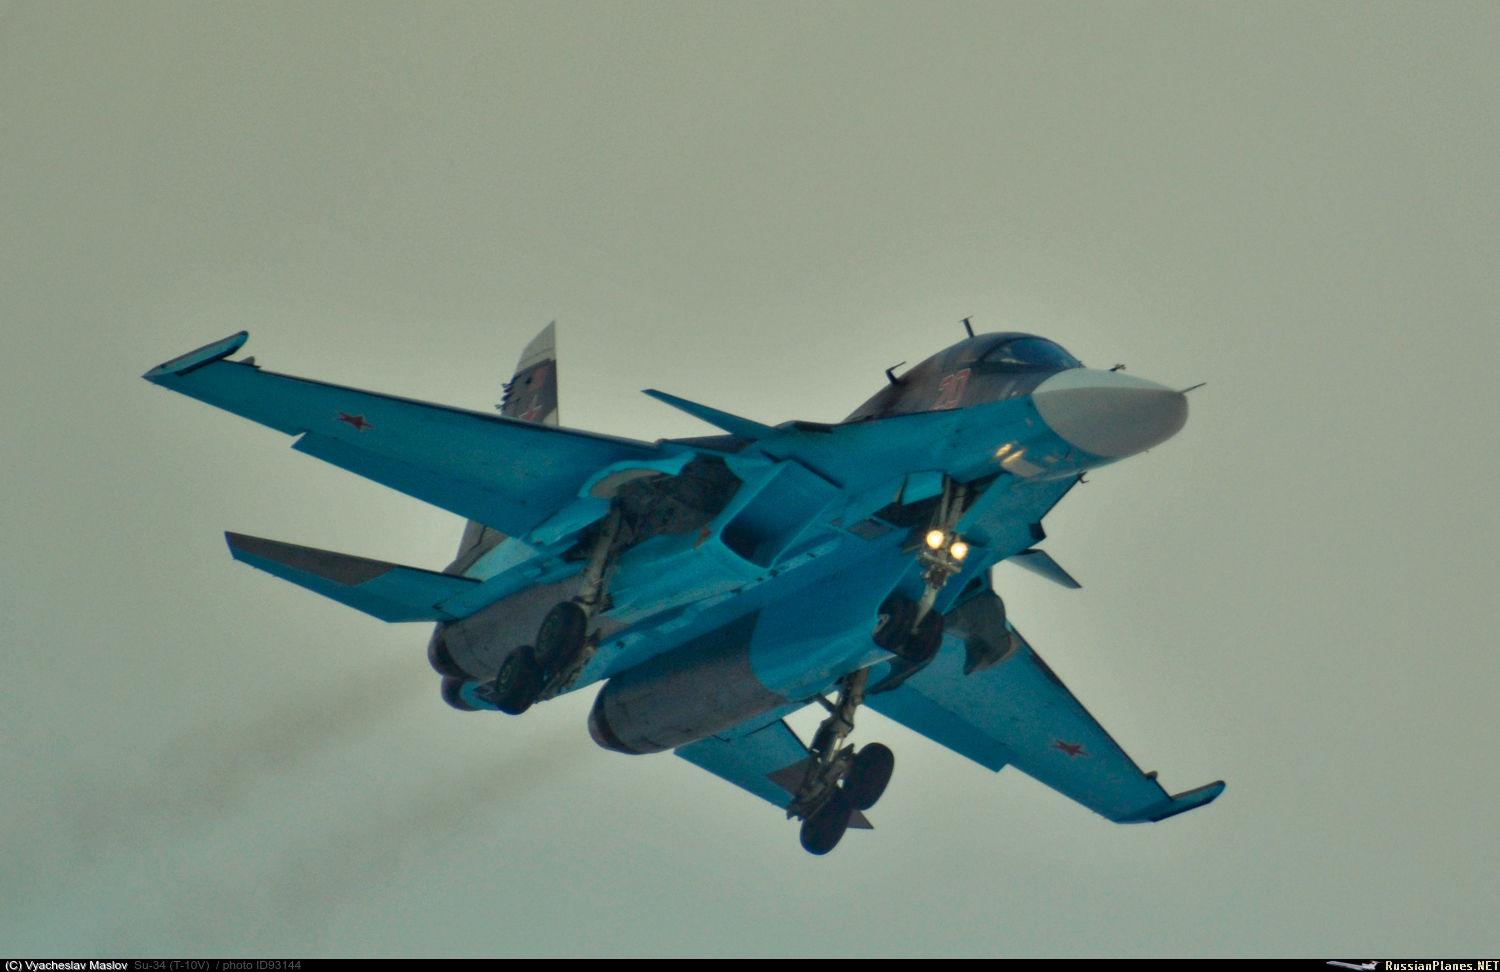 http://russianplanes.net/images/to94000/093144.jpg